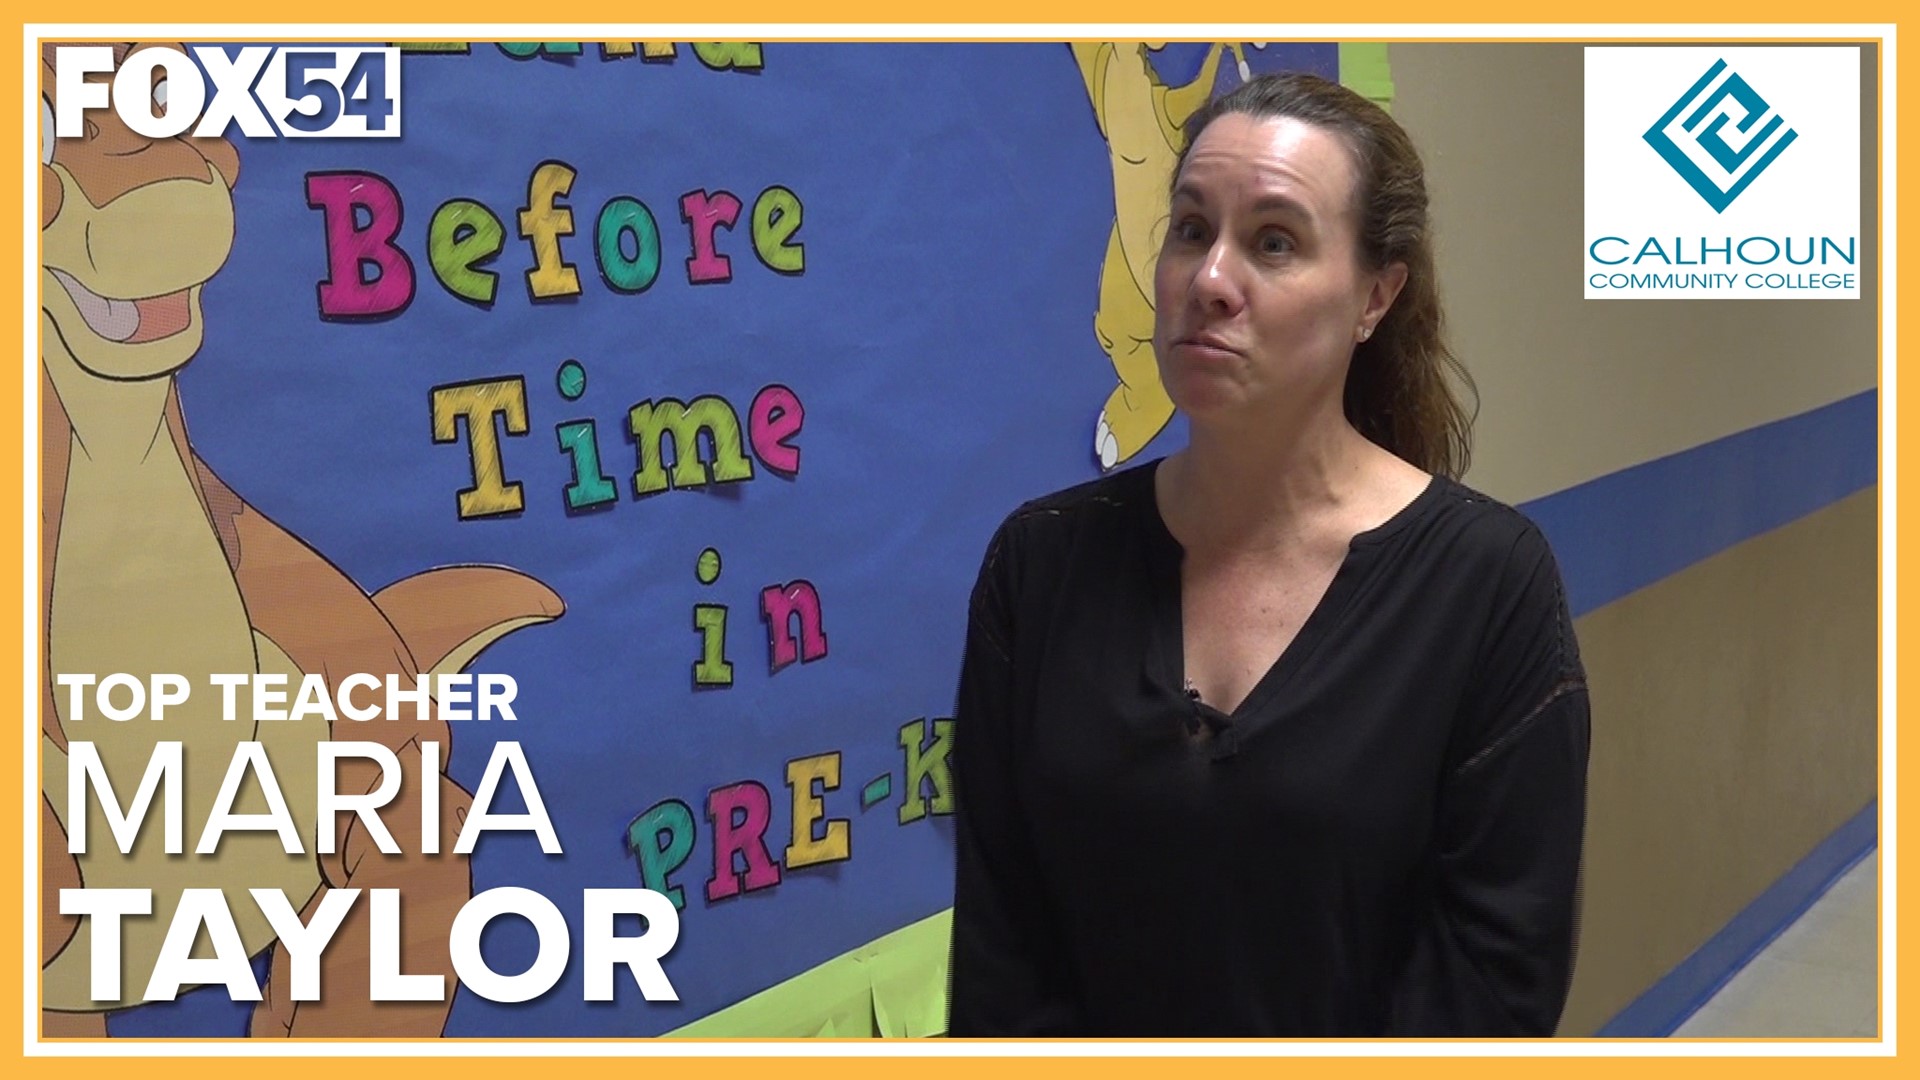 Maria Taylor of Jones Valley Elementary School is loved by students, teachers, and families.